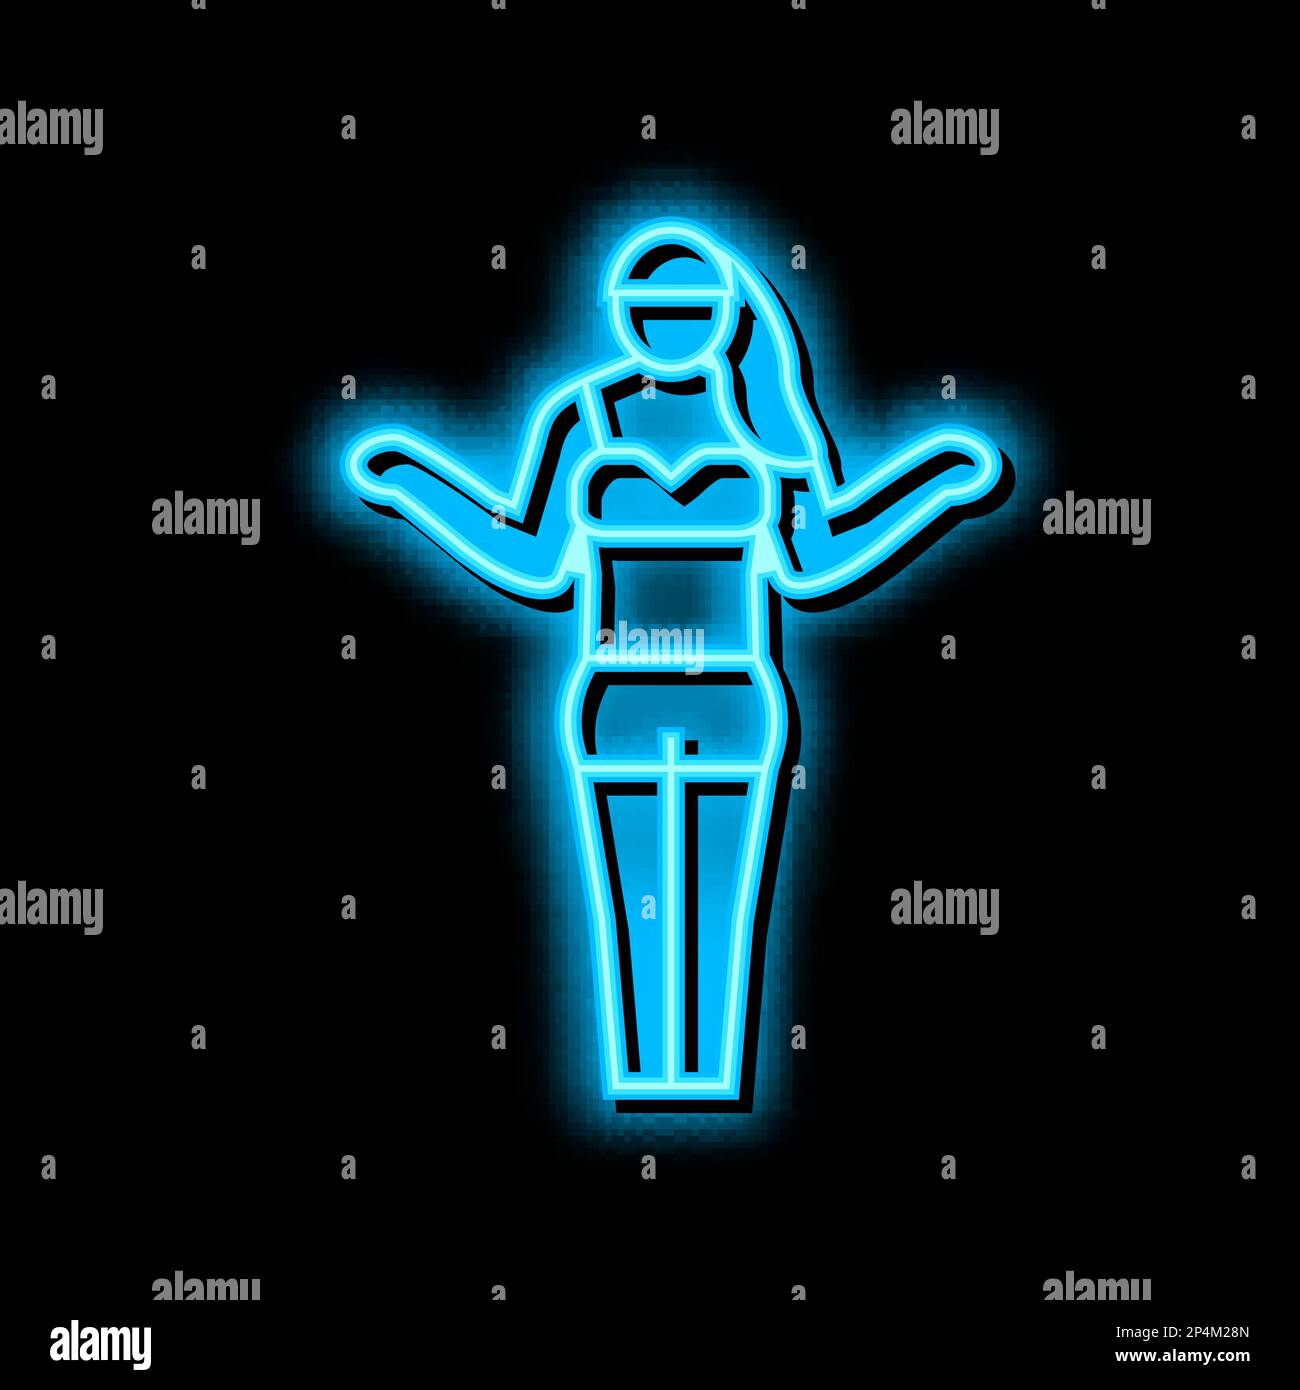 tanned woman neon glow icon illustration Stock Vector